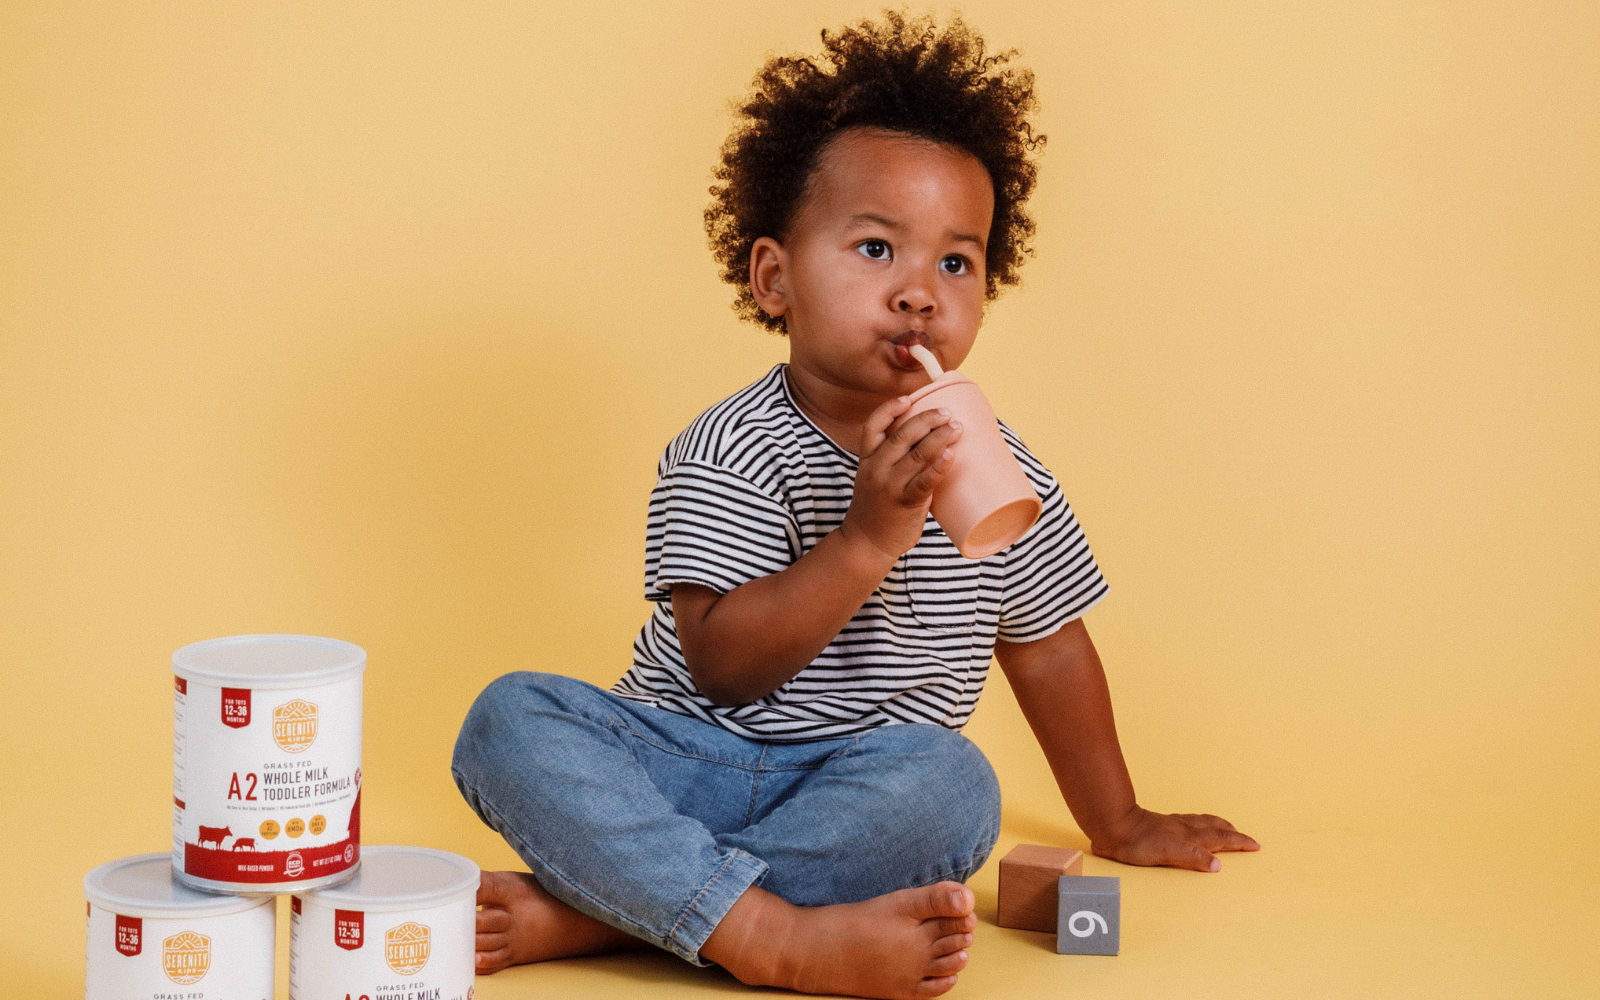 Toddler Formula = Clean Label Project Purity Award!